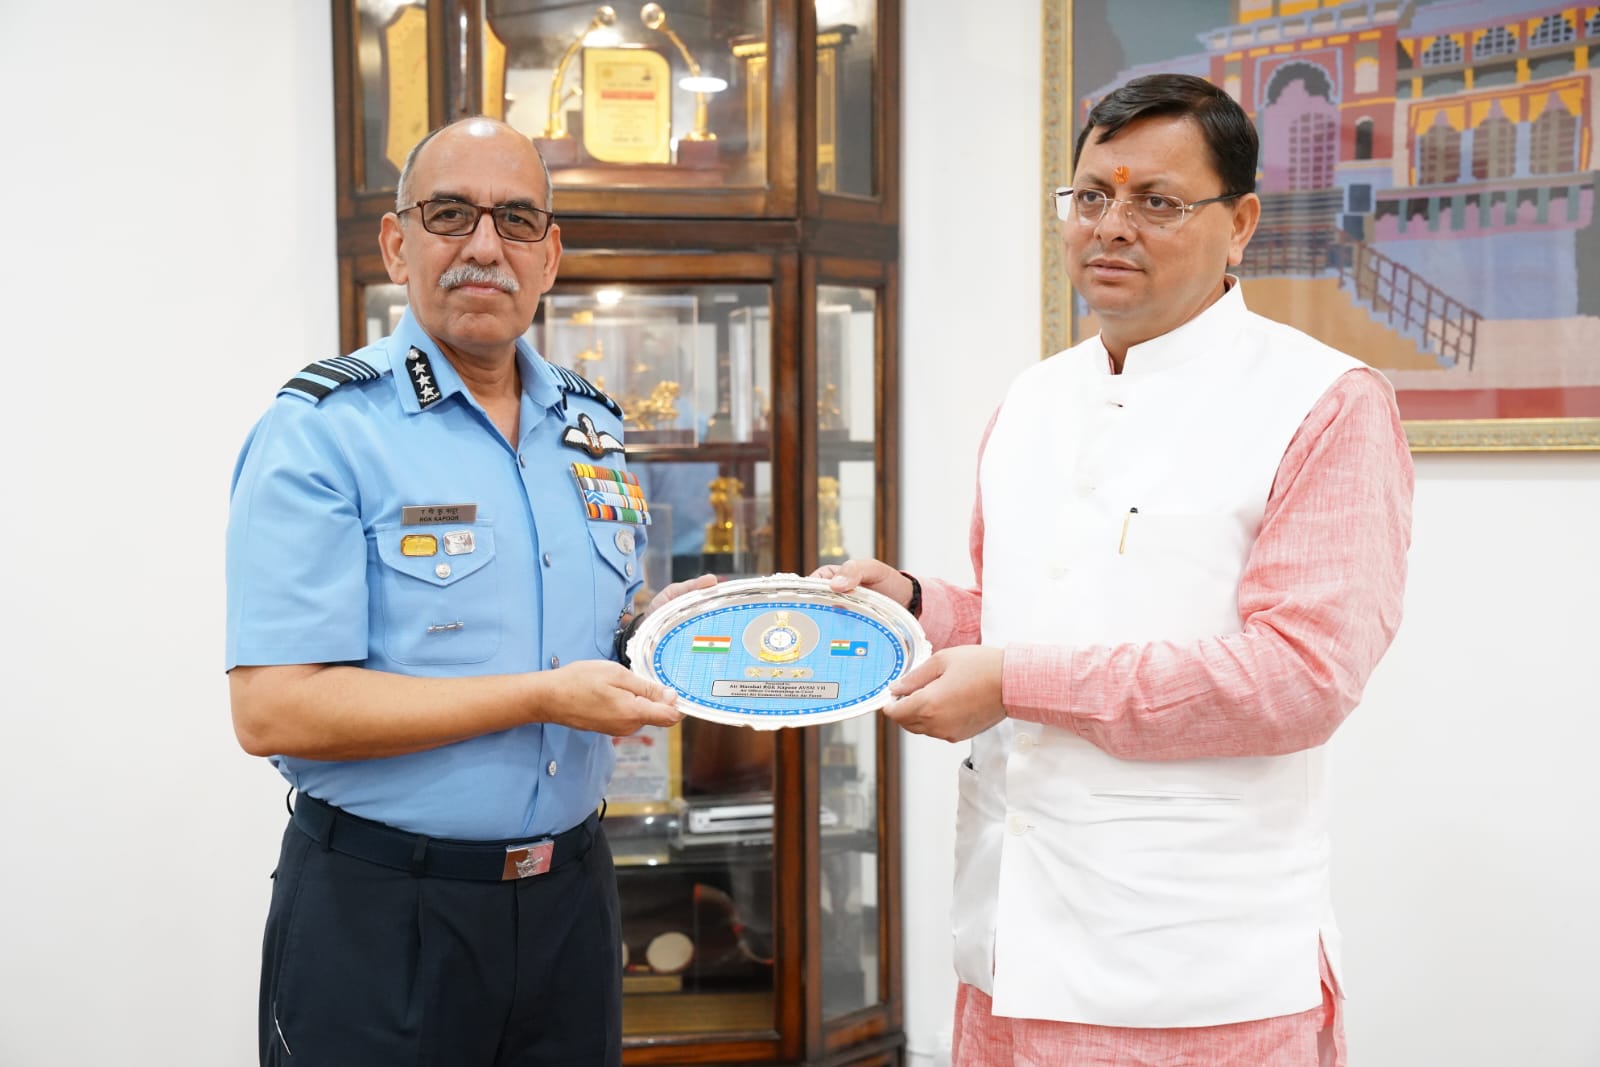 Air Marshal, Ravi Gopal Krishna Kapoor, Air Officer Commanding-in-Chief, Central Air Command paid a courtesy call on Chief Minister Dhami